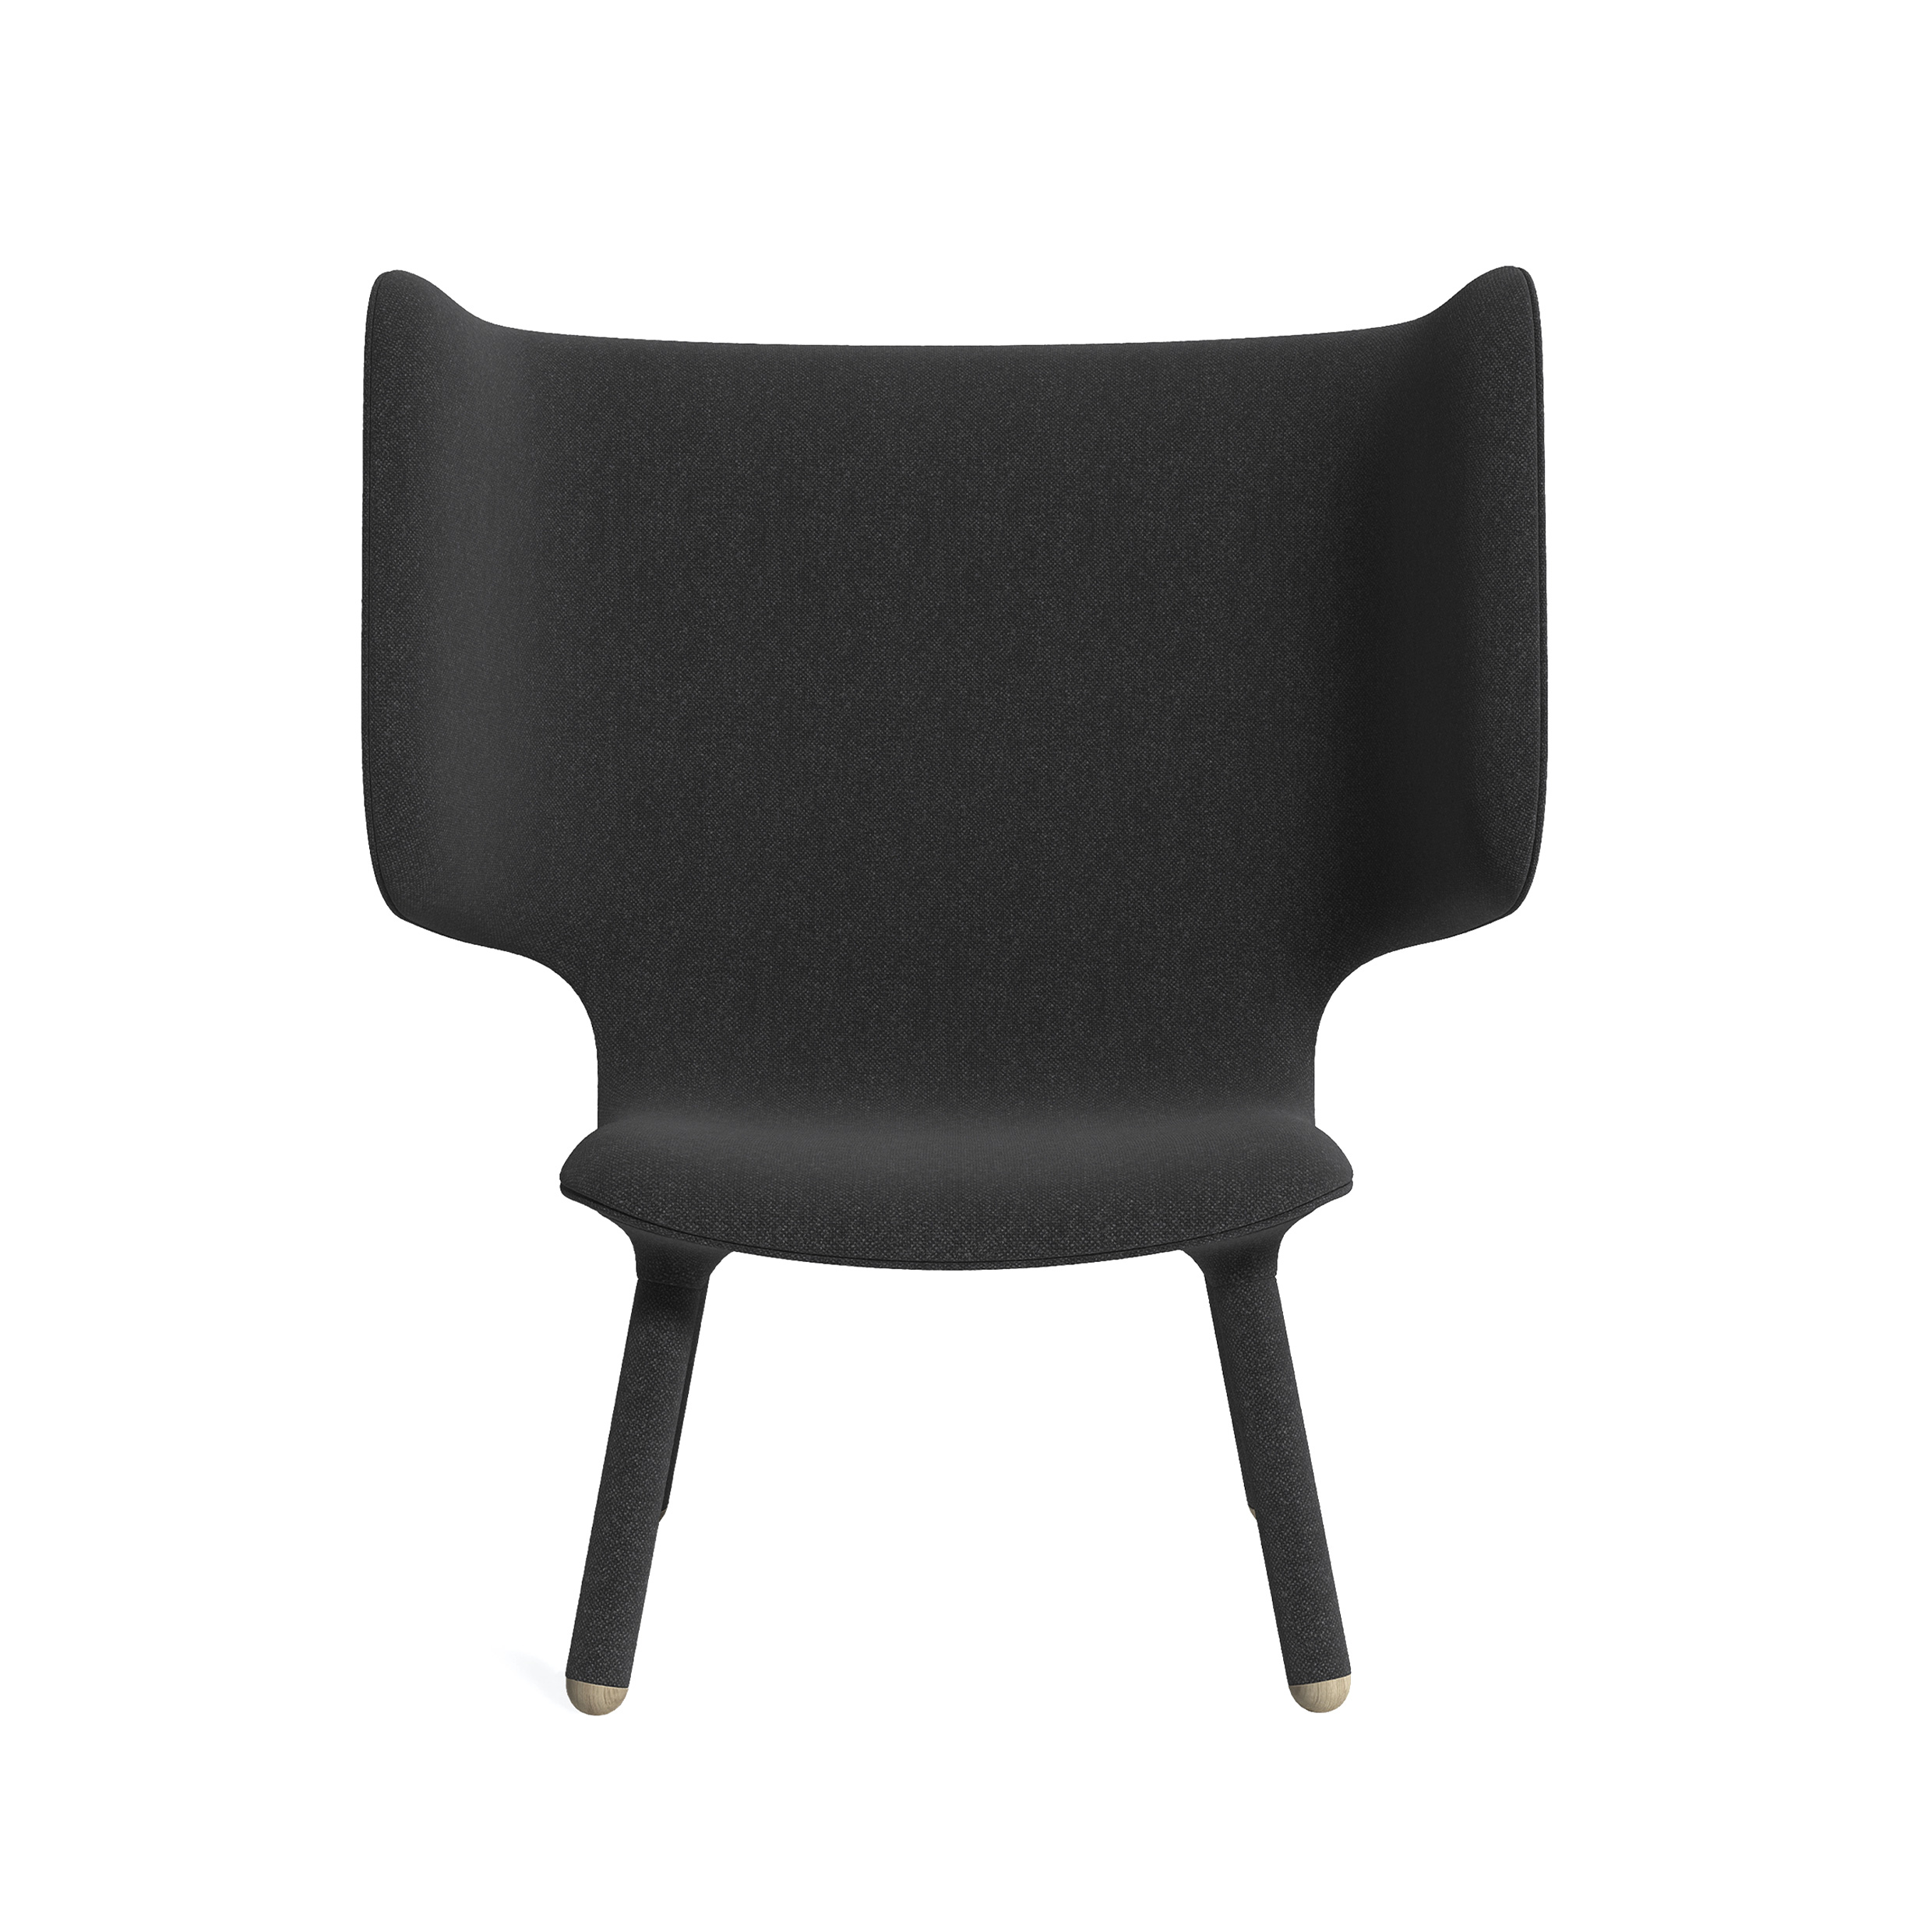 NEW WORKS // TEMBO LOUNGE CHAIR - LOUNGE CHAIR | SCHWARZ